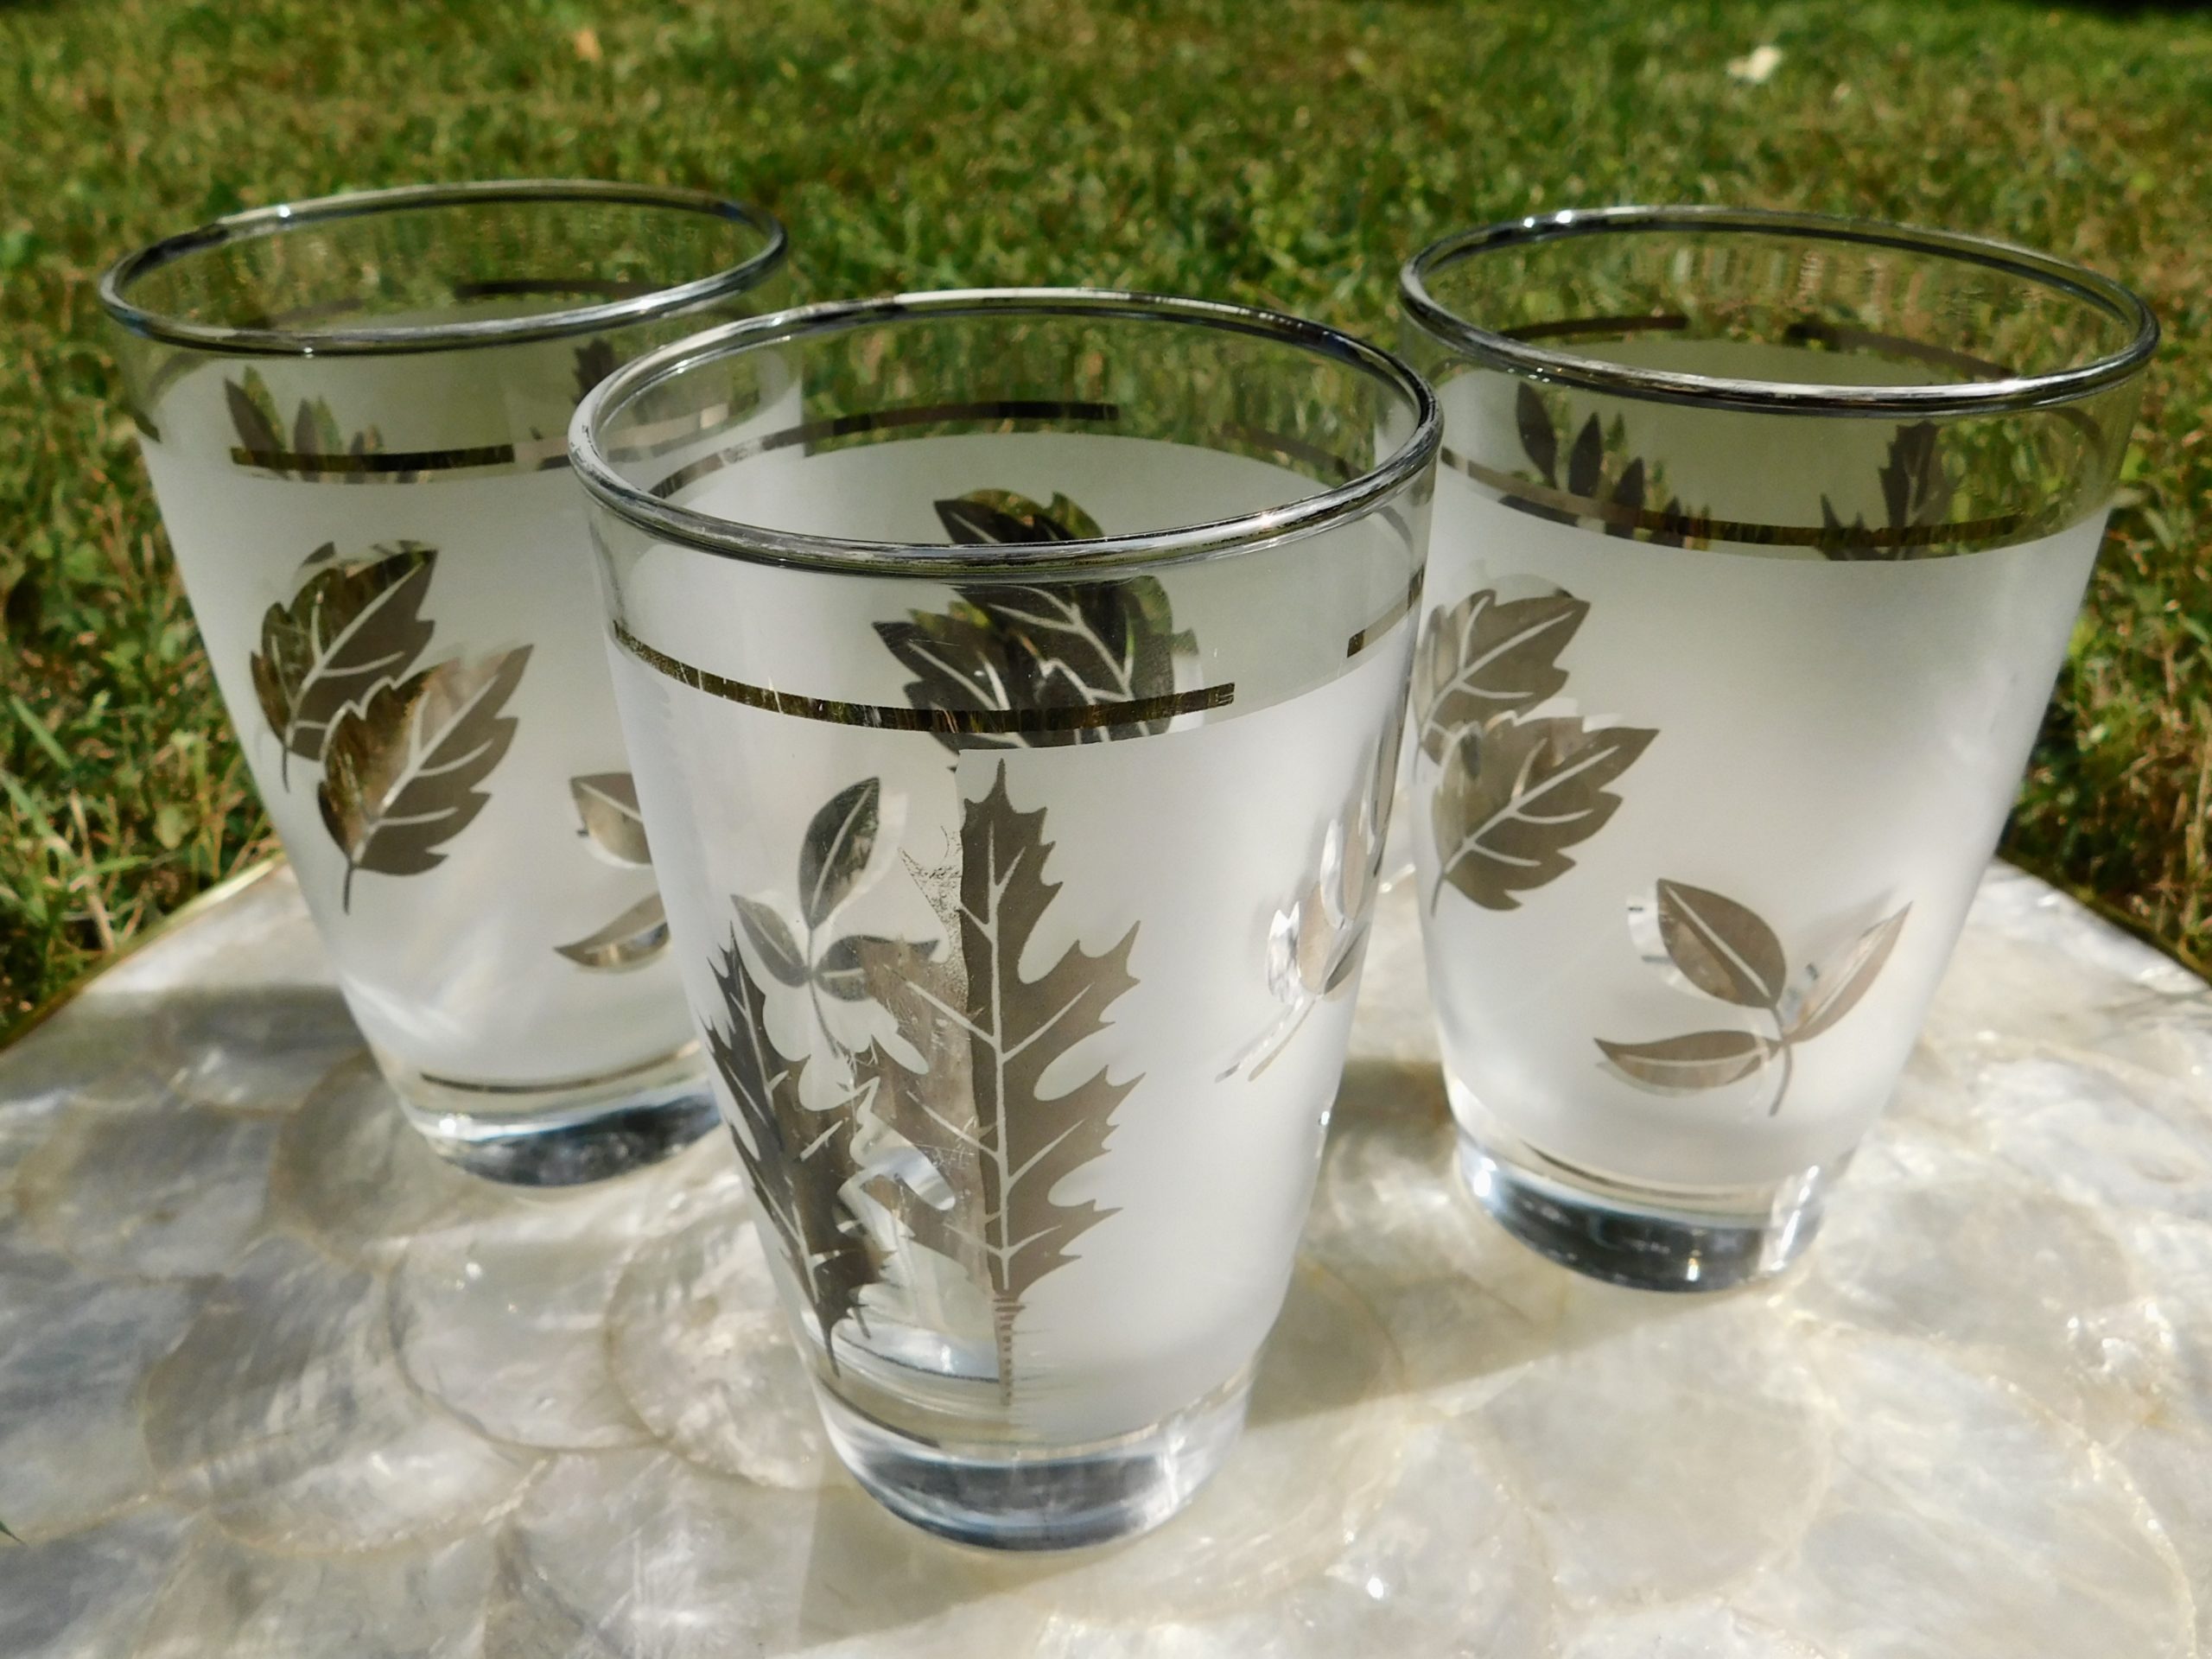 Vintage Libbey Glass: Patterns and Pieces Made to Last